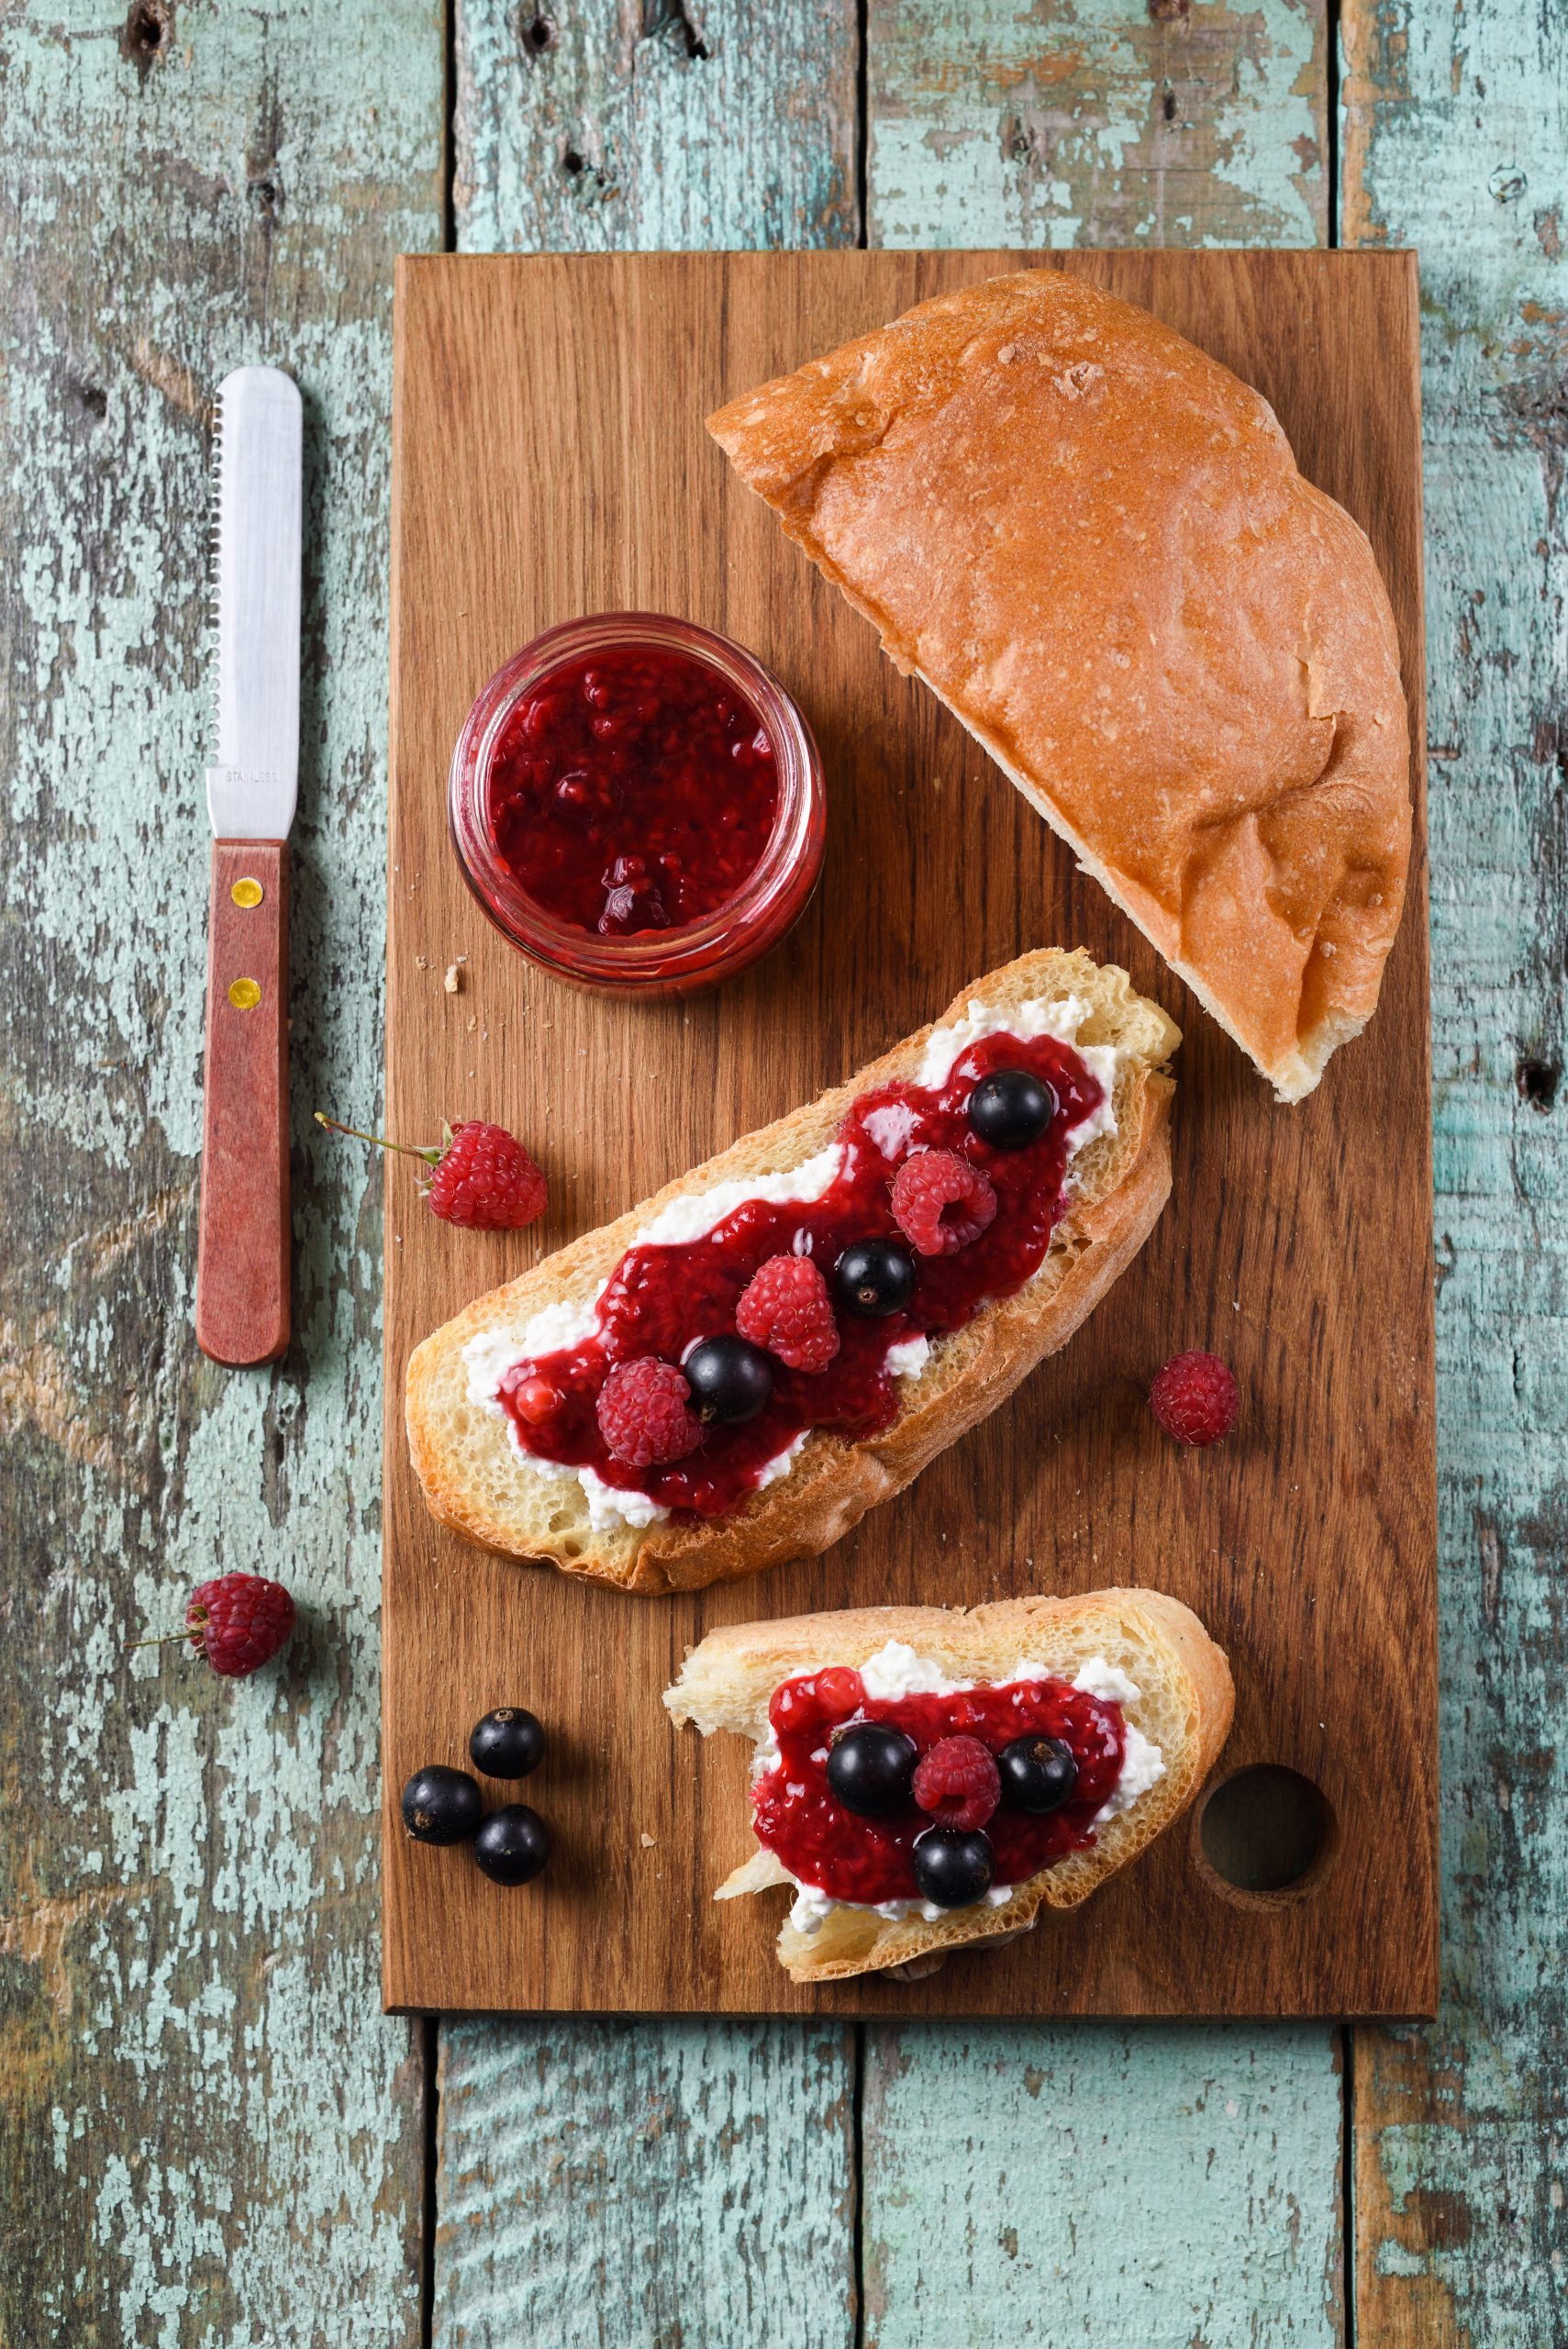 The open-face Raspberry-Blueberry Bruschetta sandwich is perfect as a breakfast treat, a snack, or for dessert.